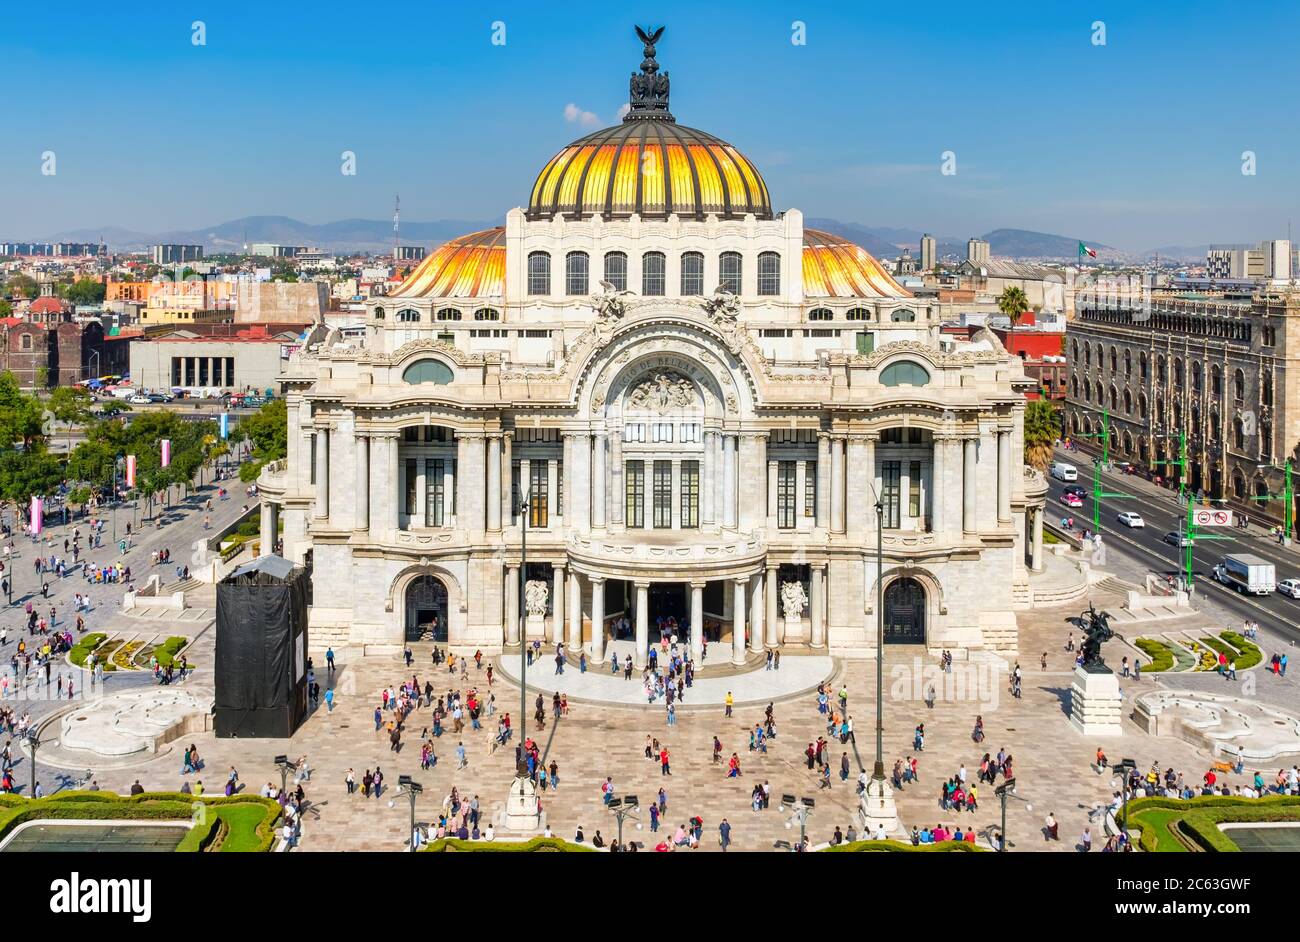 Palacio de Bellas Artes or Palace of Fine Arts, a famous theater, museum and music venue in Mexico City Stock Photo